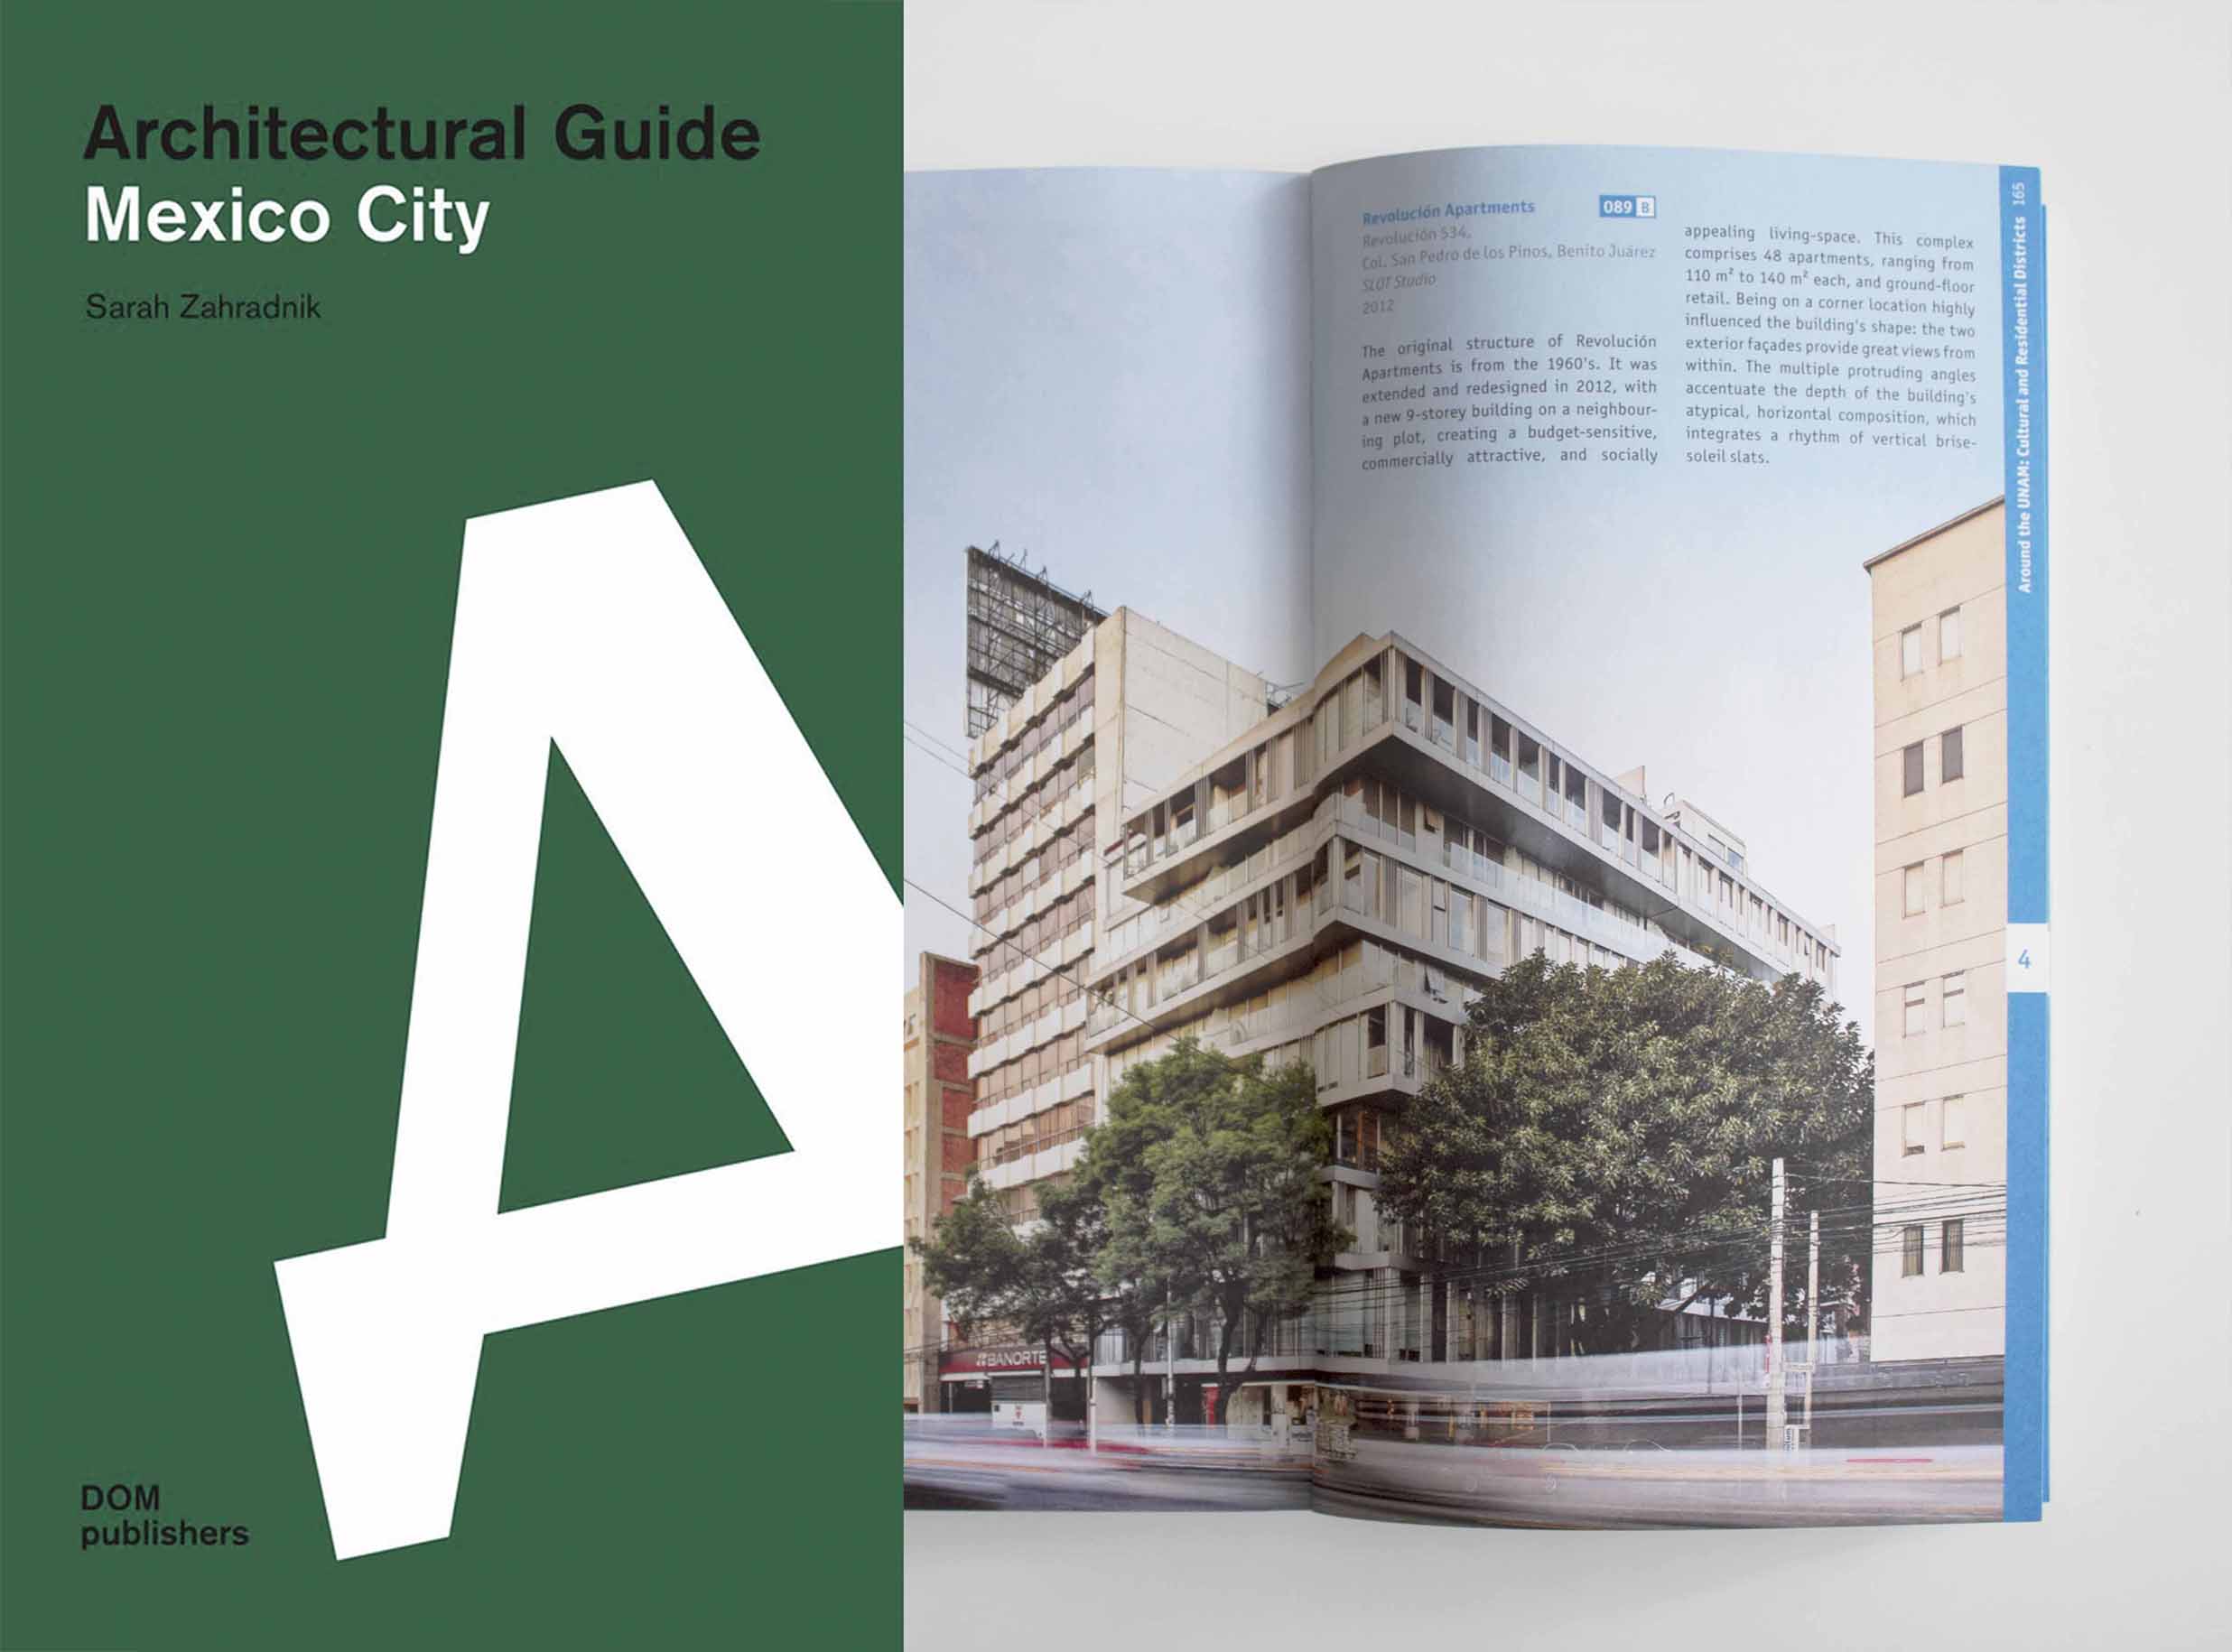 REVOLUCIÓN APARTMENTS FOUNDED IN ARCHITECTURAL GUIDE : SLOT